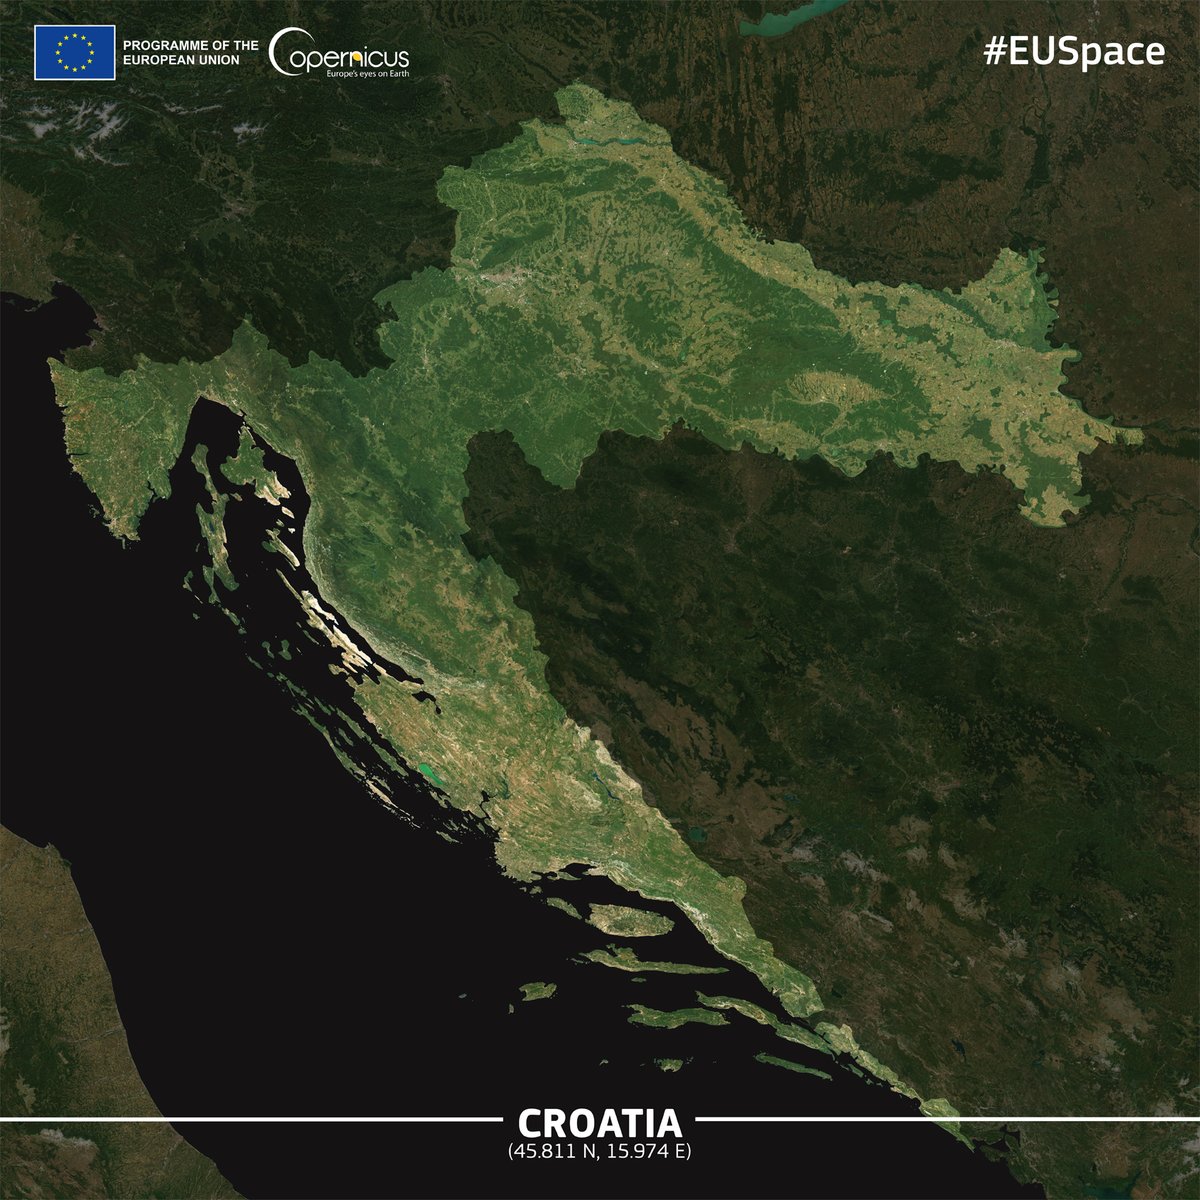 #EUSpace #NewYear Countdown The eyes of #EU Space 🇪🇺🛰️Programme unveil the beauty of #EU27, one Member State at a time Only 19 days to go until 2024 Today, we show #Croatia 🇭🇷 #DYK that #Zagreb airport is using EGNOS-enabled landing procedures?